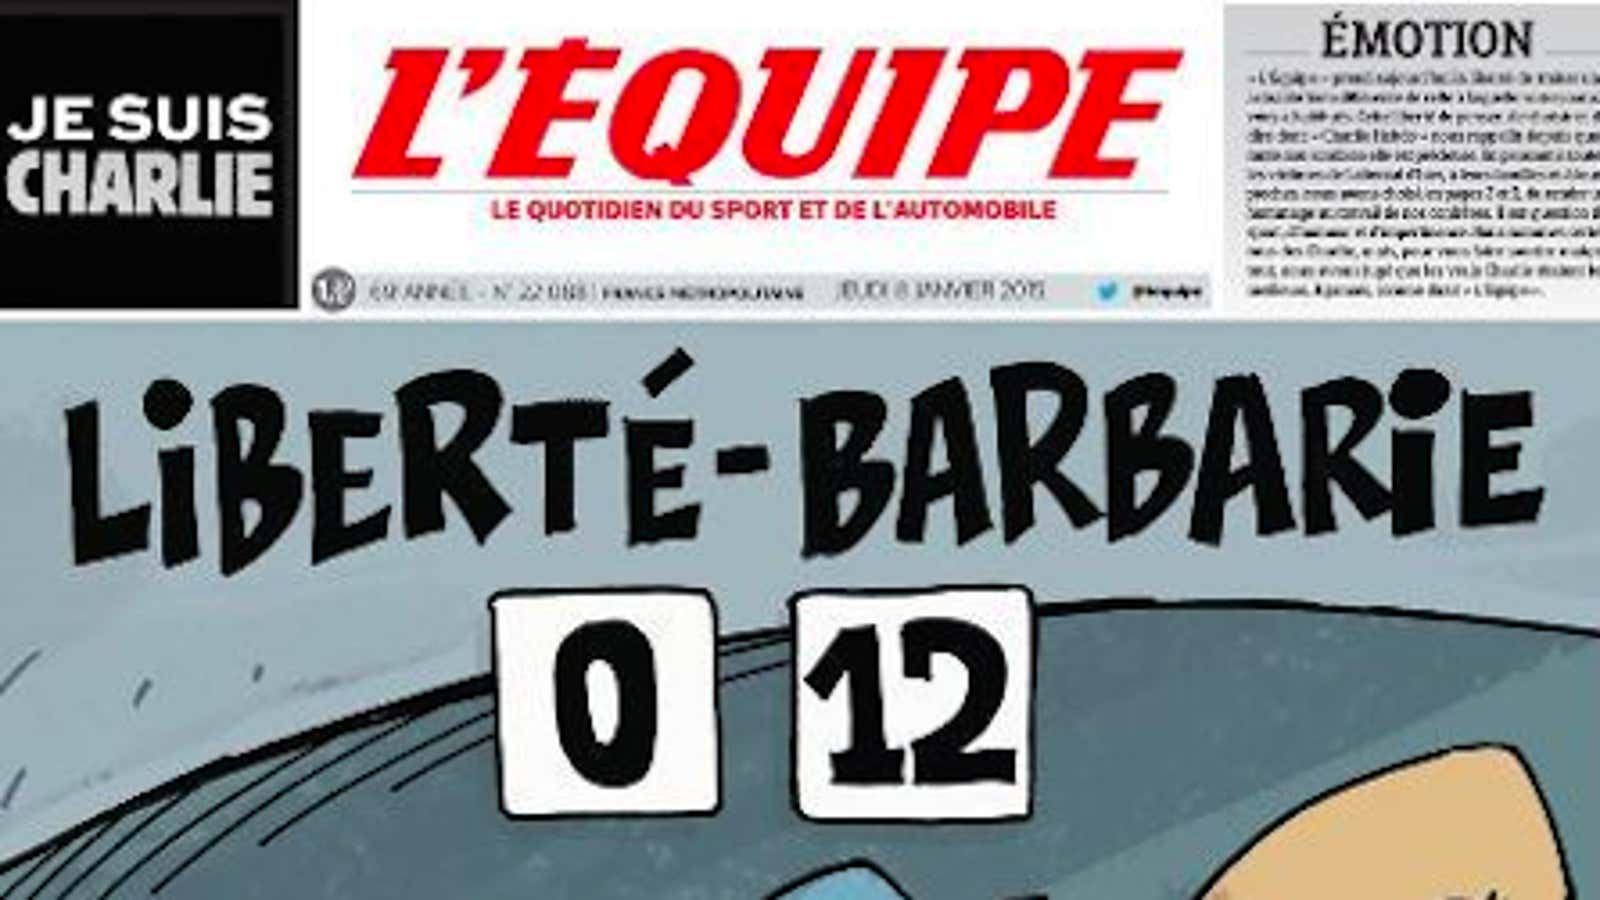 Charlie Hebdo repeatedly mocked sports journalism. L’Equipe responded with a moving tribute.